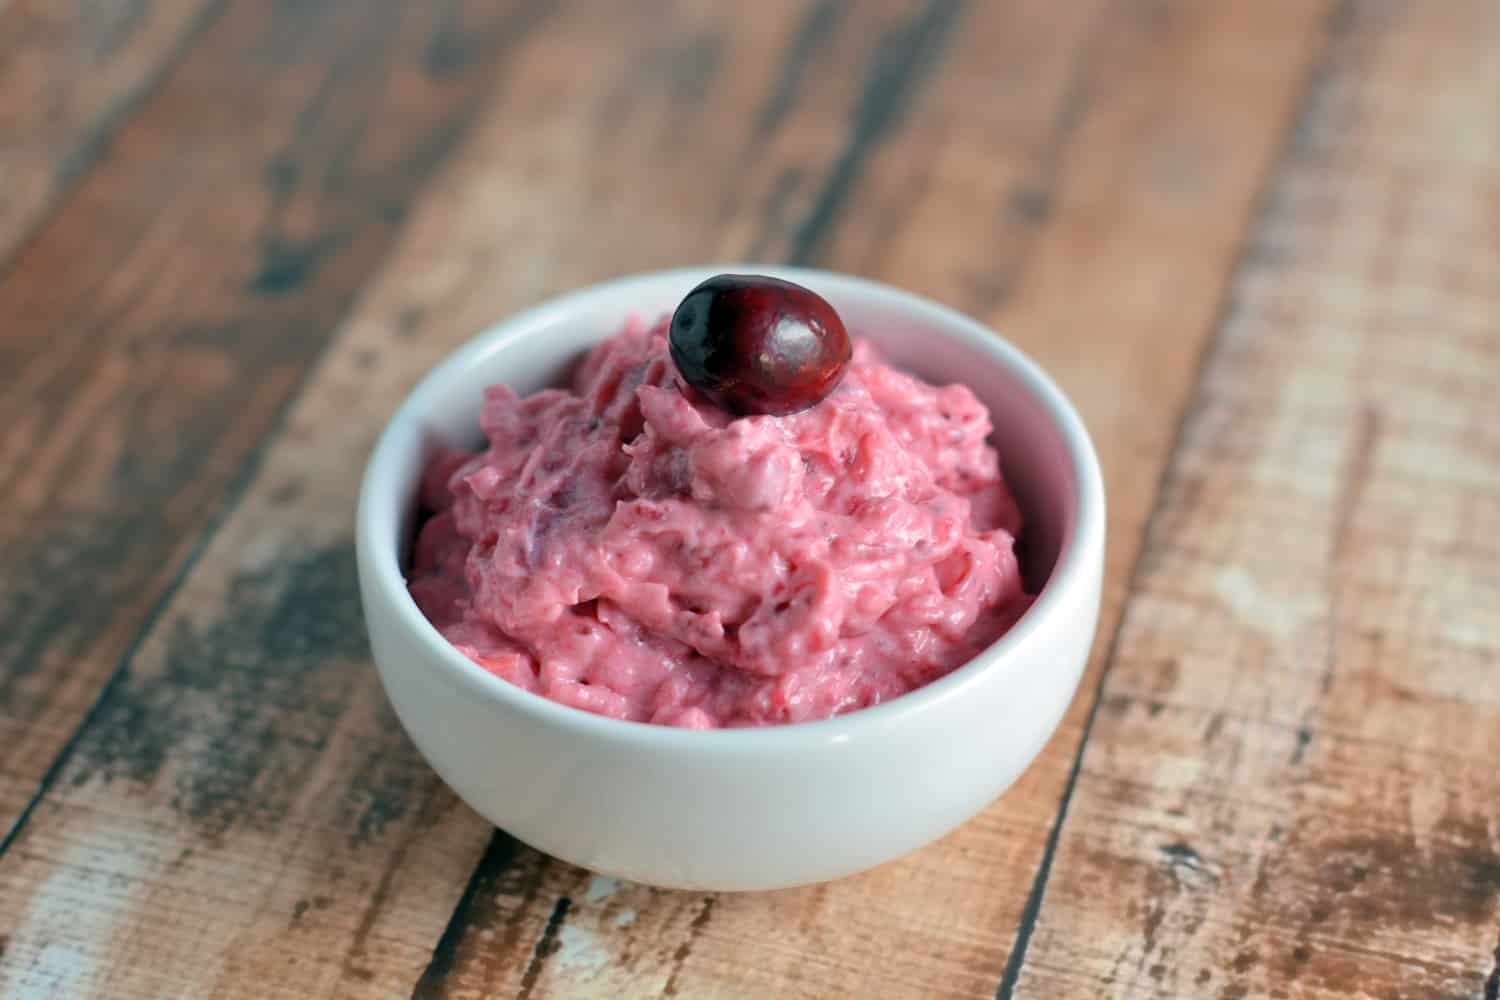 If you like mayonnaise, you will LOVE my Cranberry Mayo. Slightly sweet and just a touch tart, it adds a new dimension to any sandwich. #cranberrymayo #cranberrysauce #cranberryrelish www.savoryexperiments.com